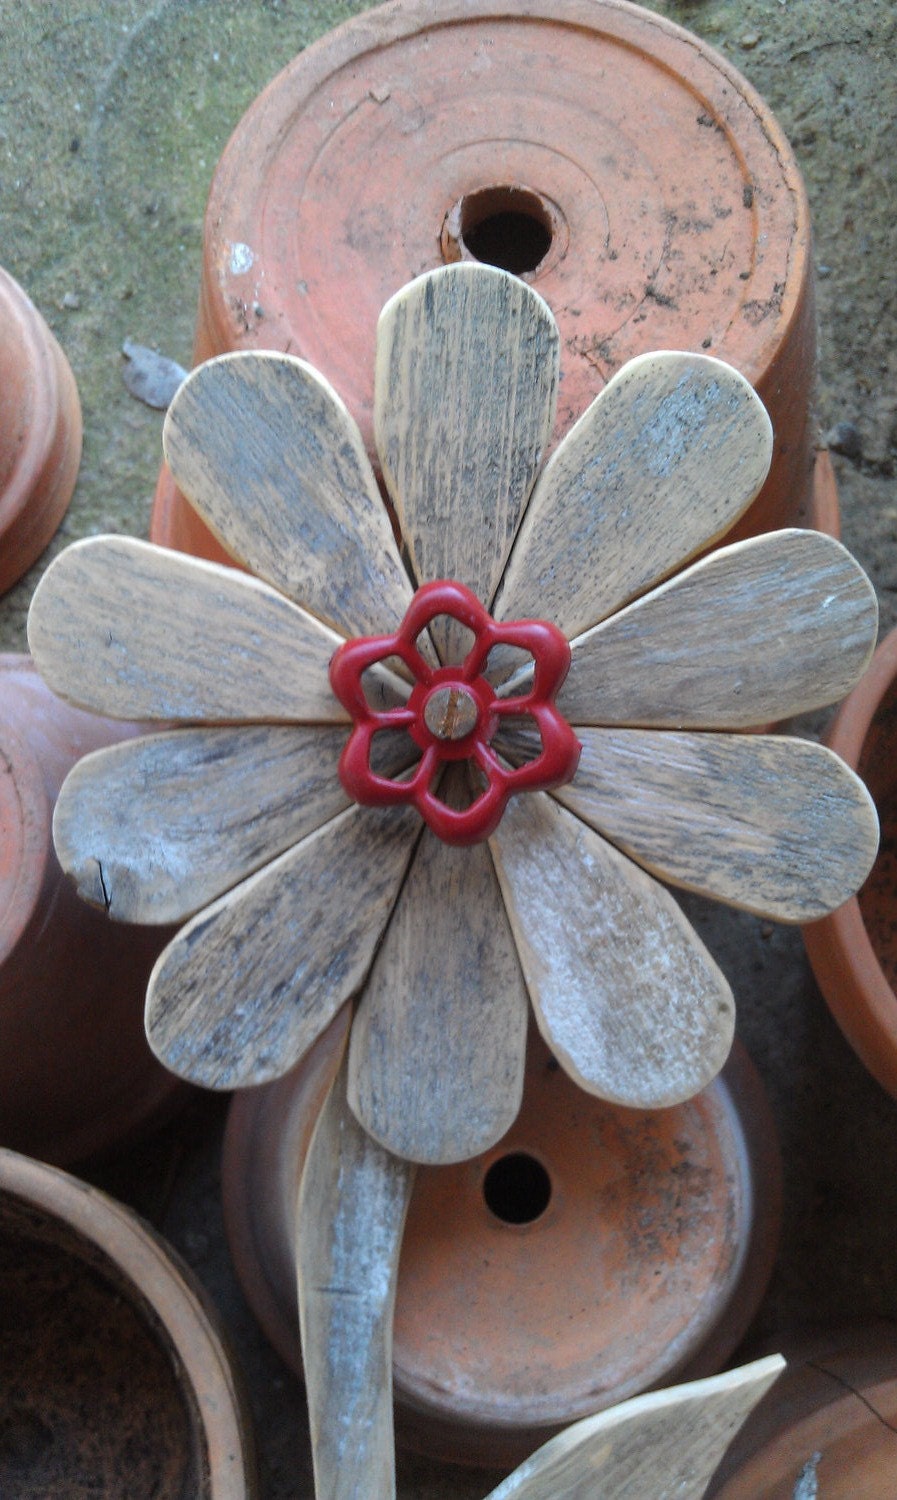 Reclaimed Wood Flower Rustic Wall Decor Rusty by grasshoppercafe